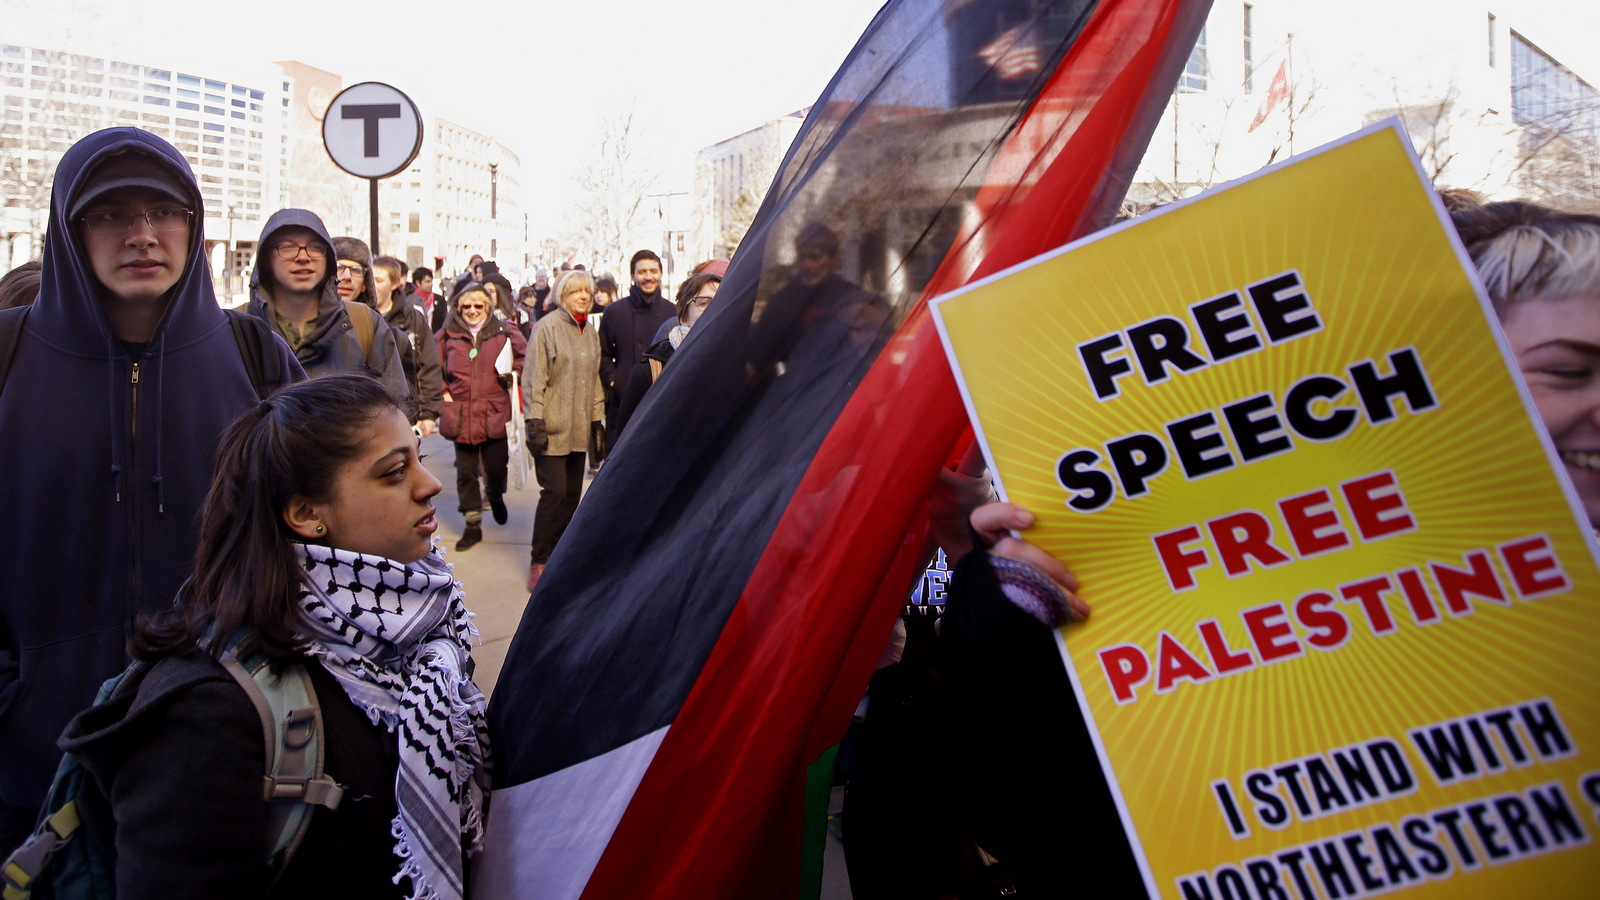 Students march in support of Students for Justice in Palestine at Northeastern University, March 18, 2014. Stephan Savoia | AP